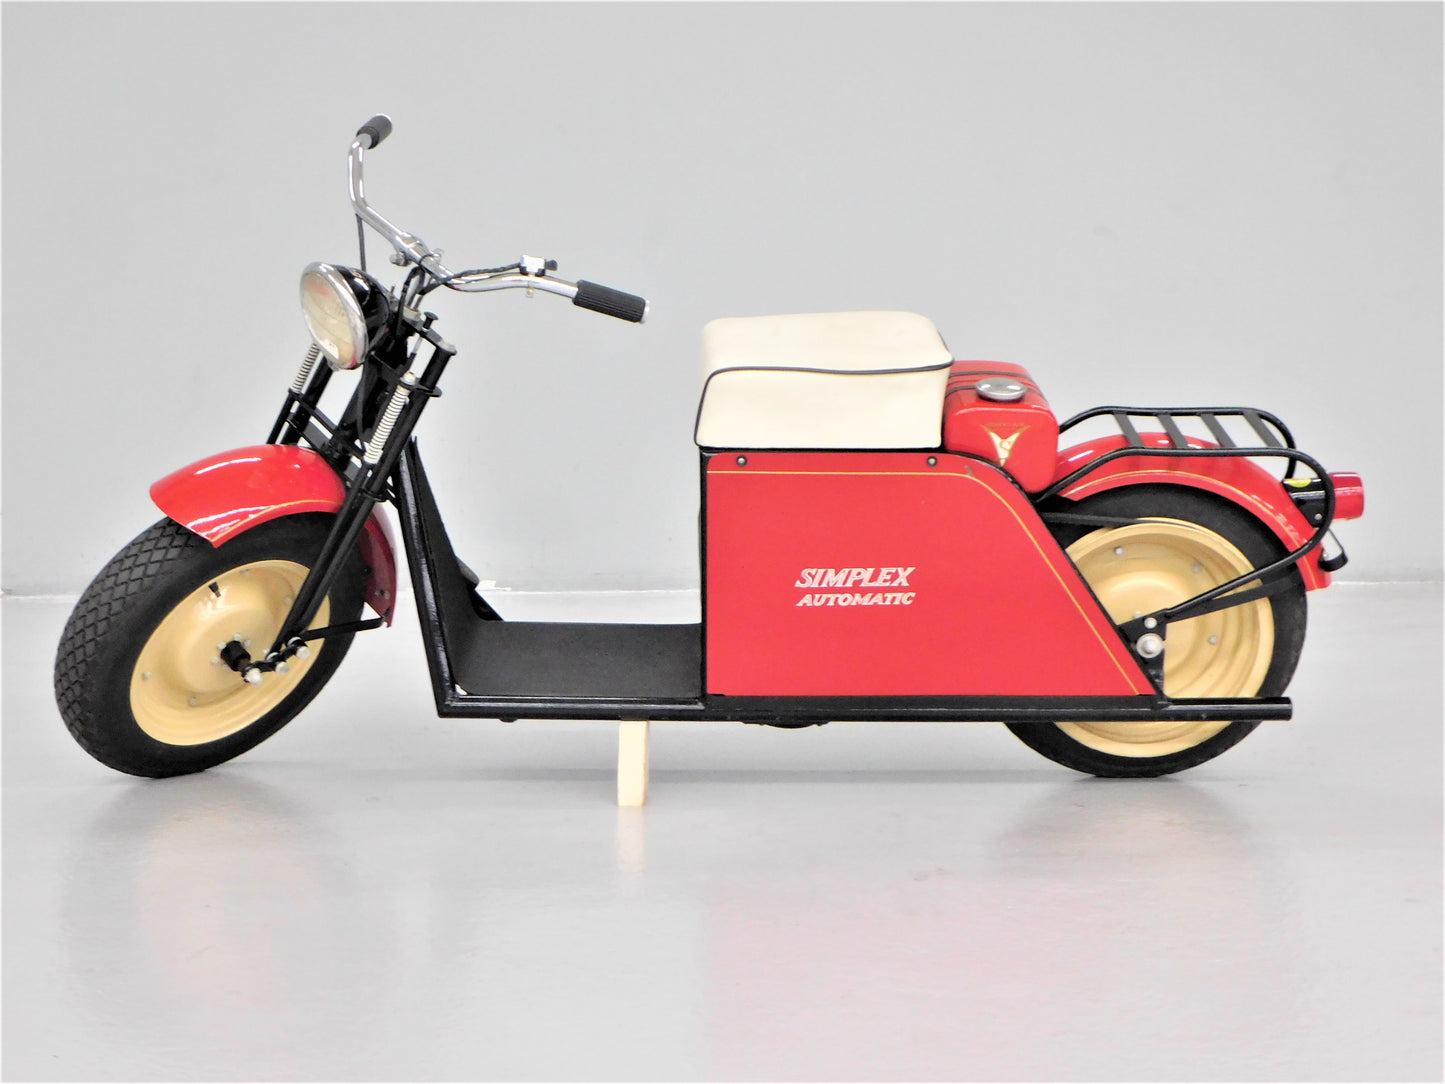 1959 Simplex Automatic Scooter